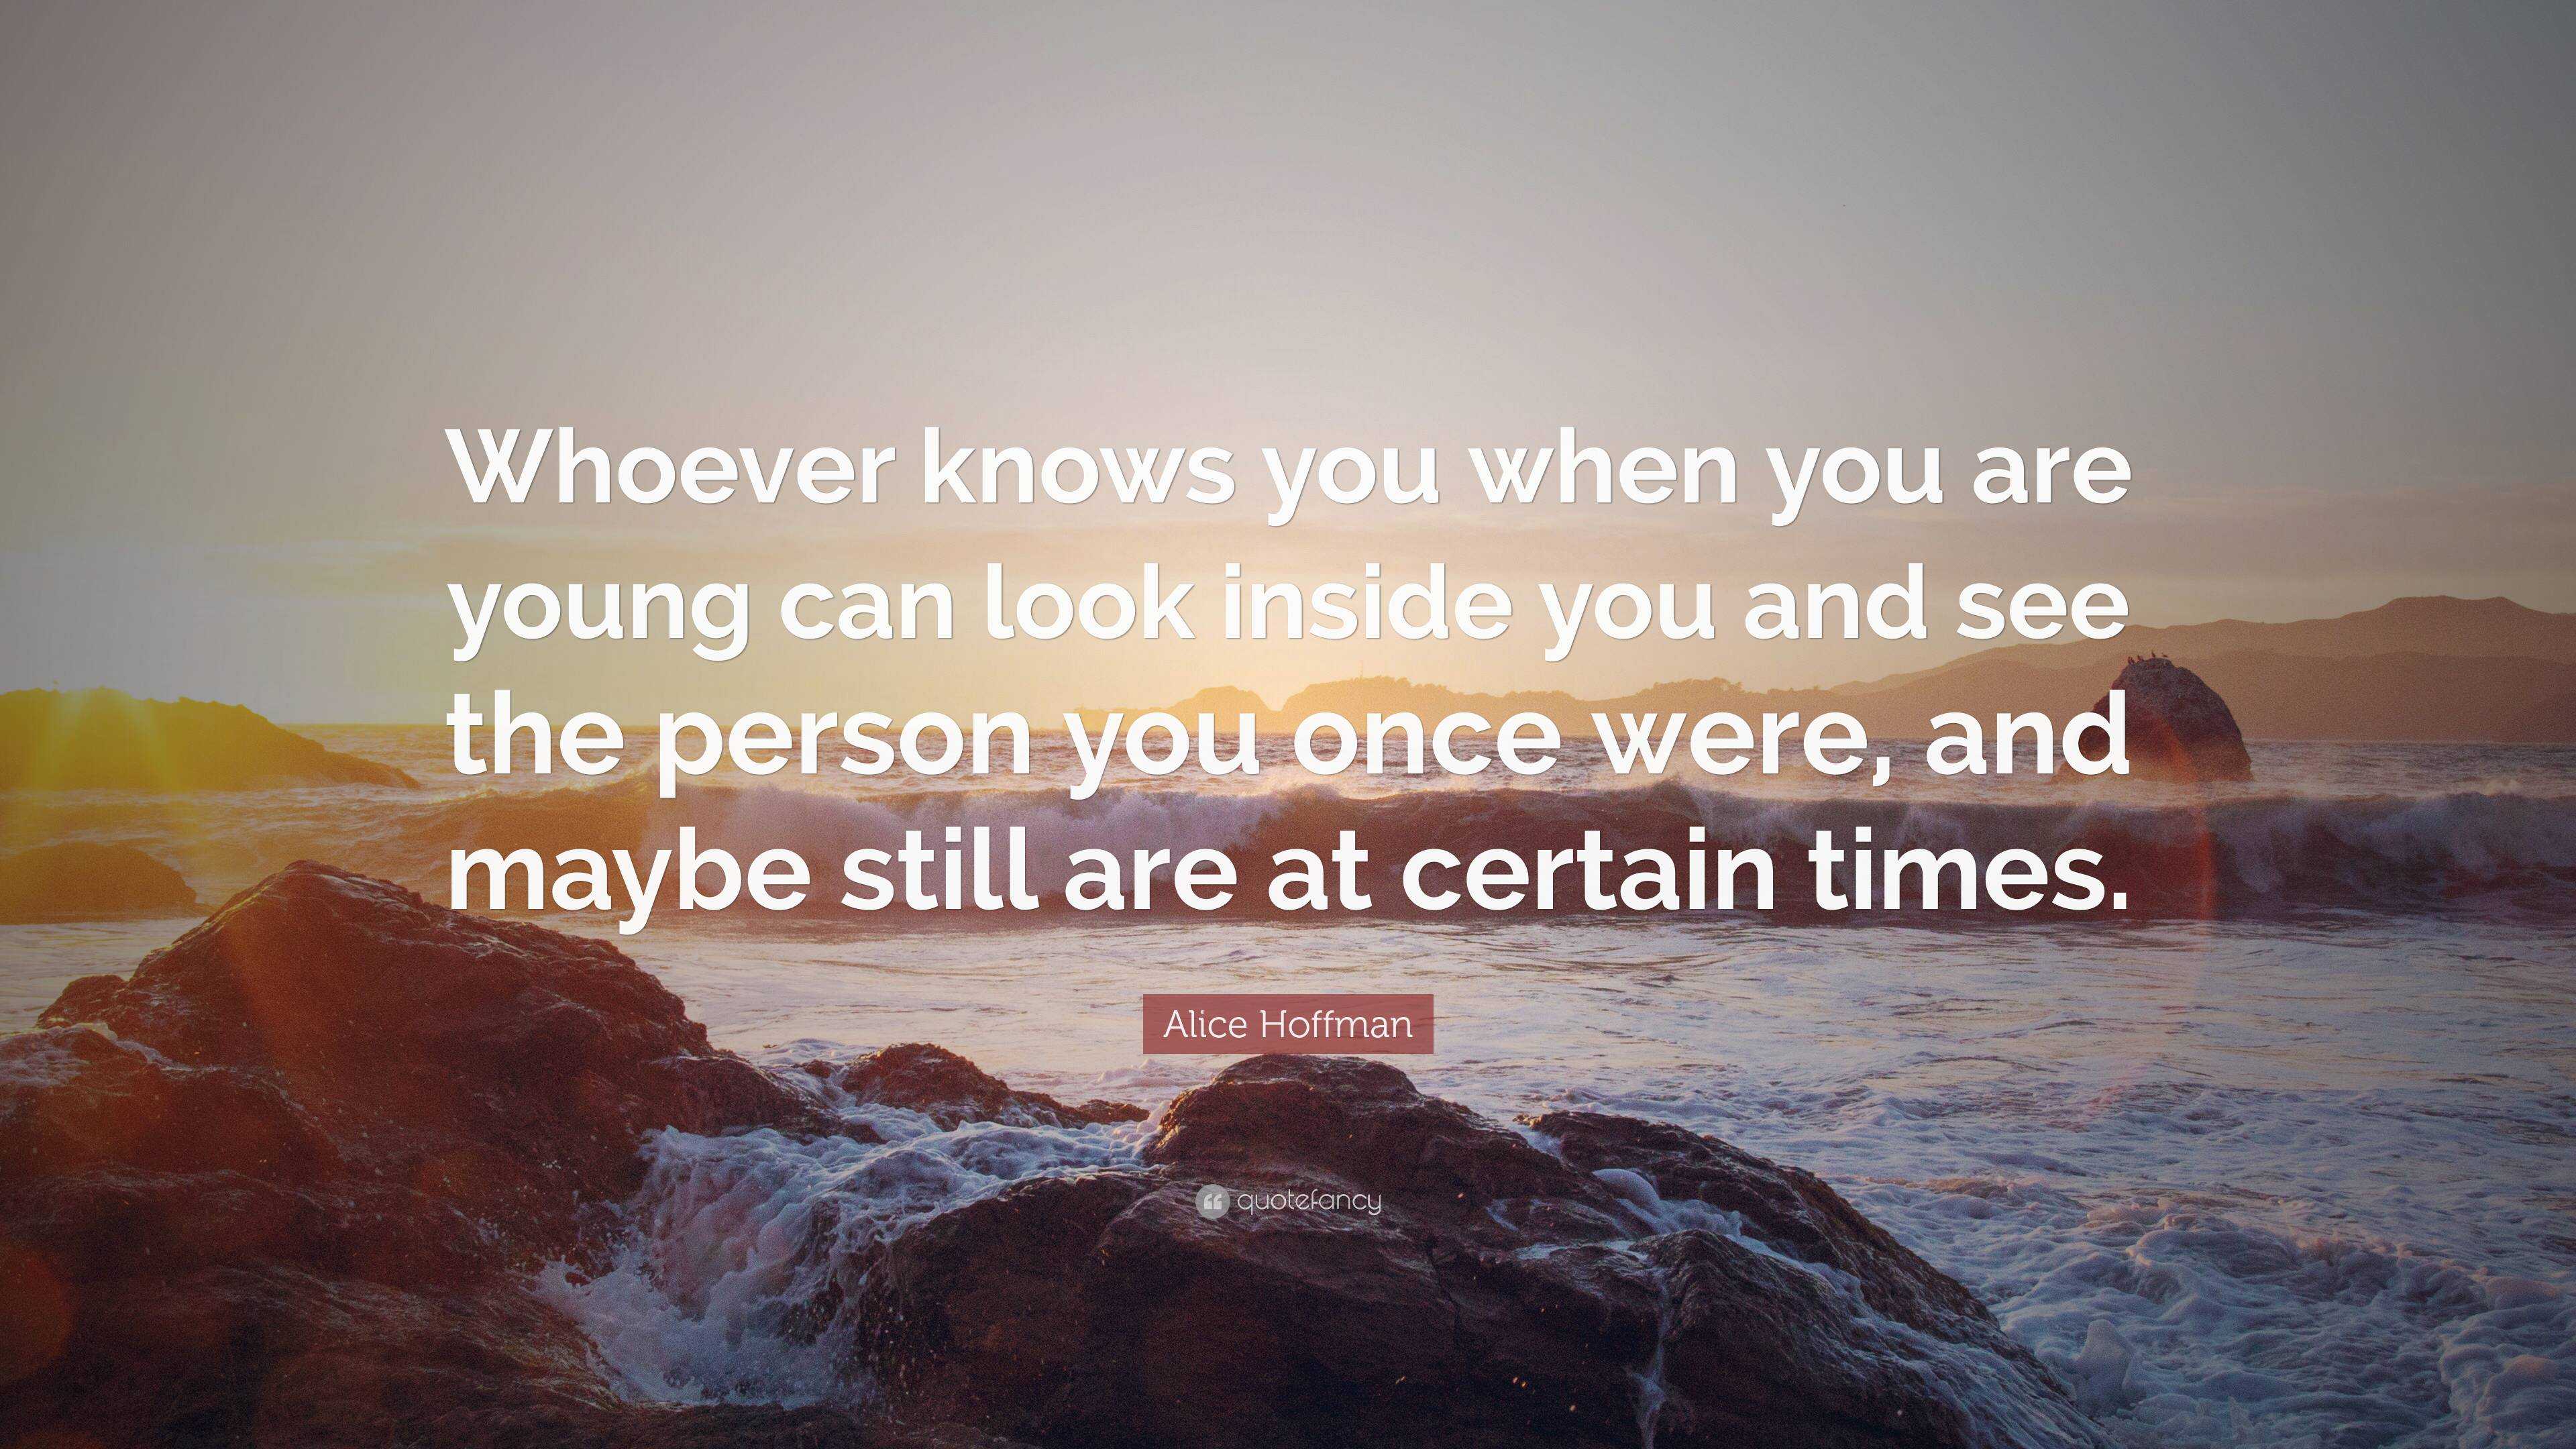 Alice Hoffman Quote: “Whoever knows you when you are young can look ...